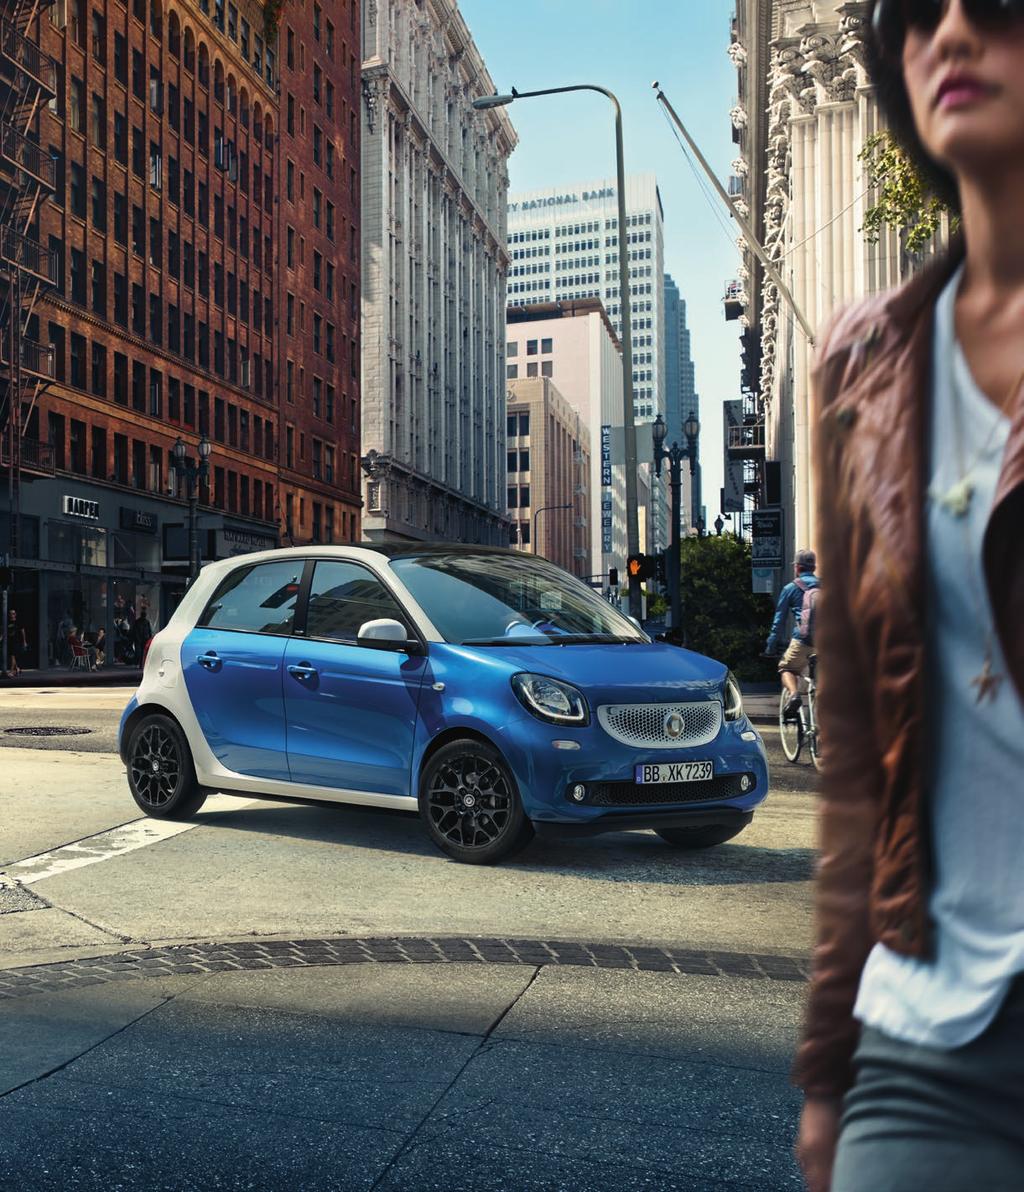 And a look through the windows to the interior that is available in three colour variants shows that the smart forfour has a whole lot of confidence. Stylish, timeless, chic. 38.